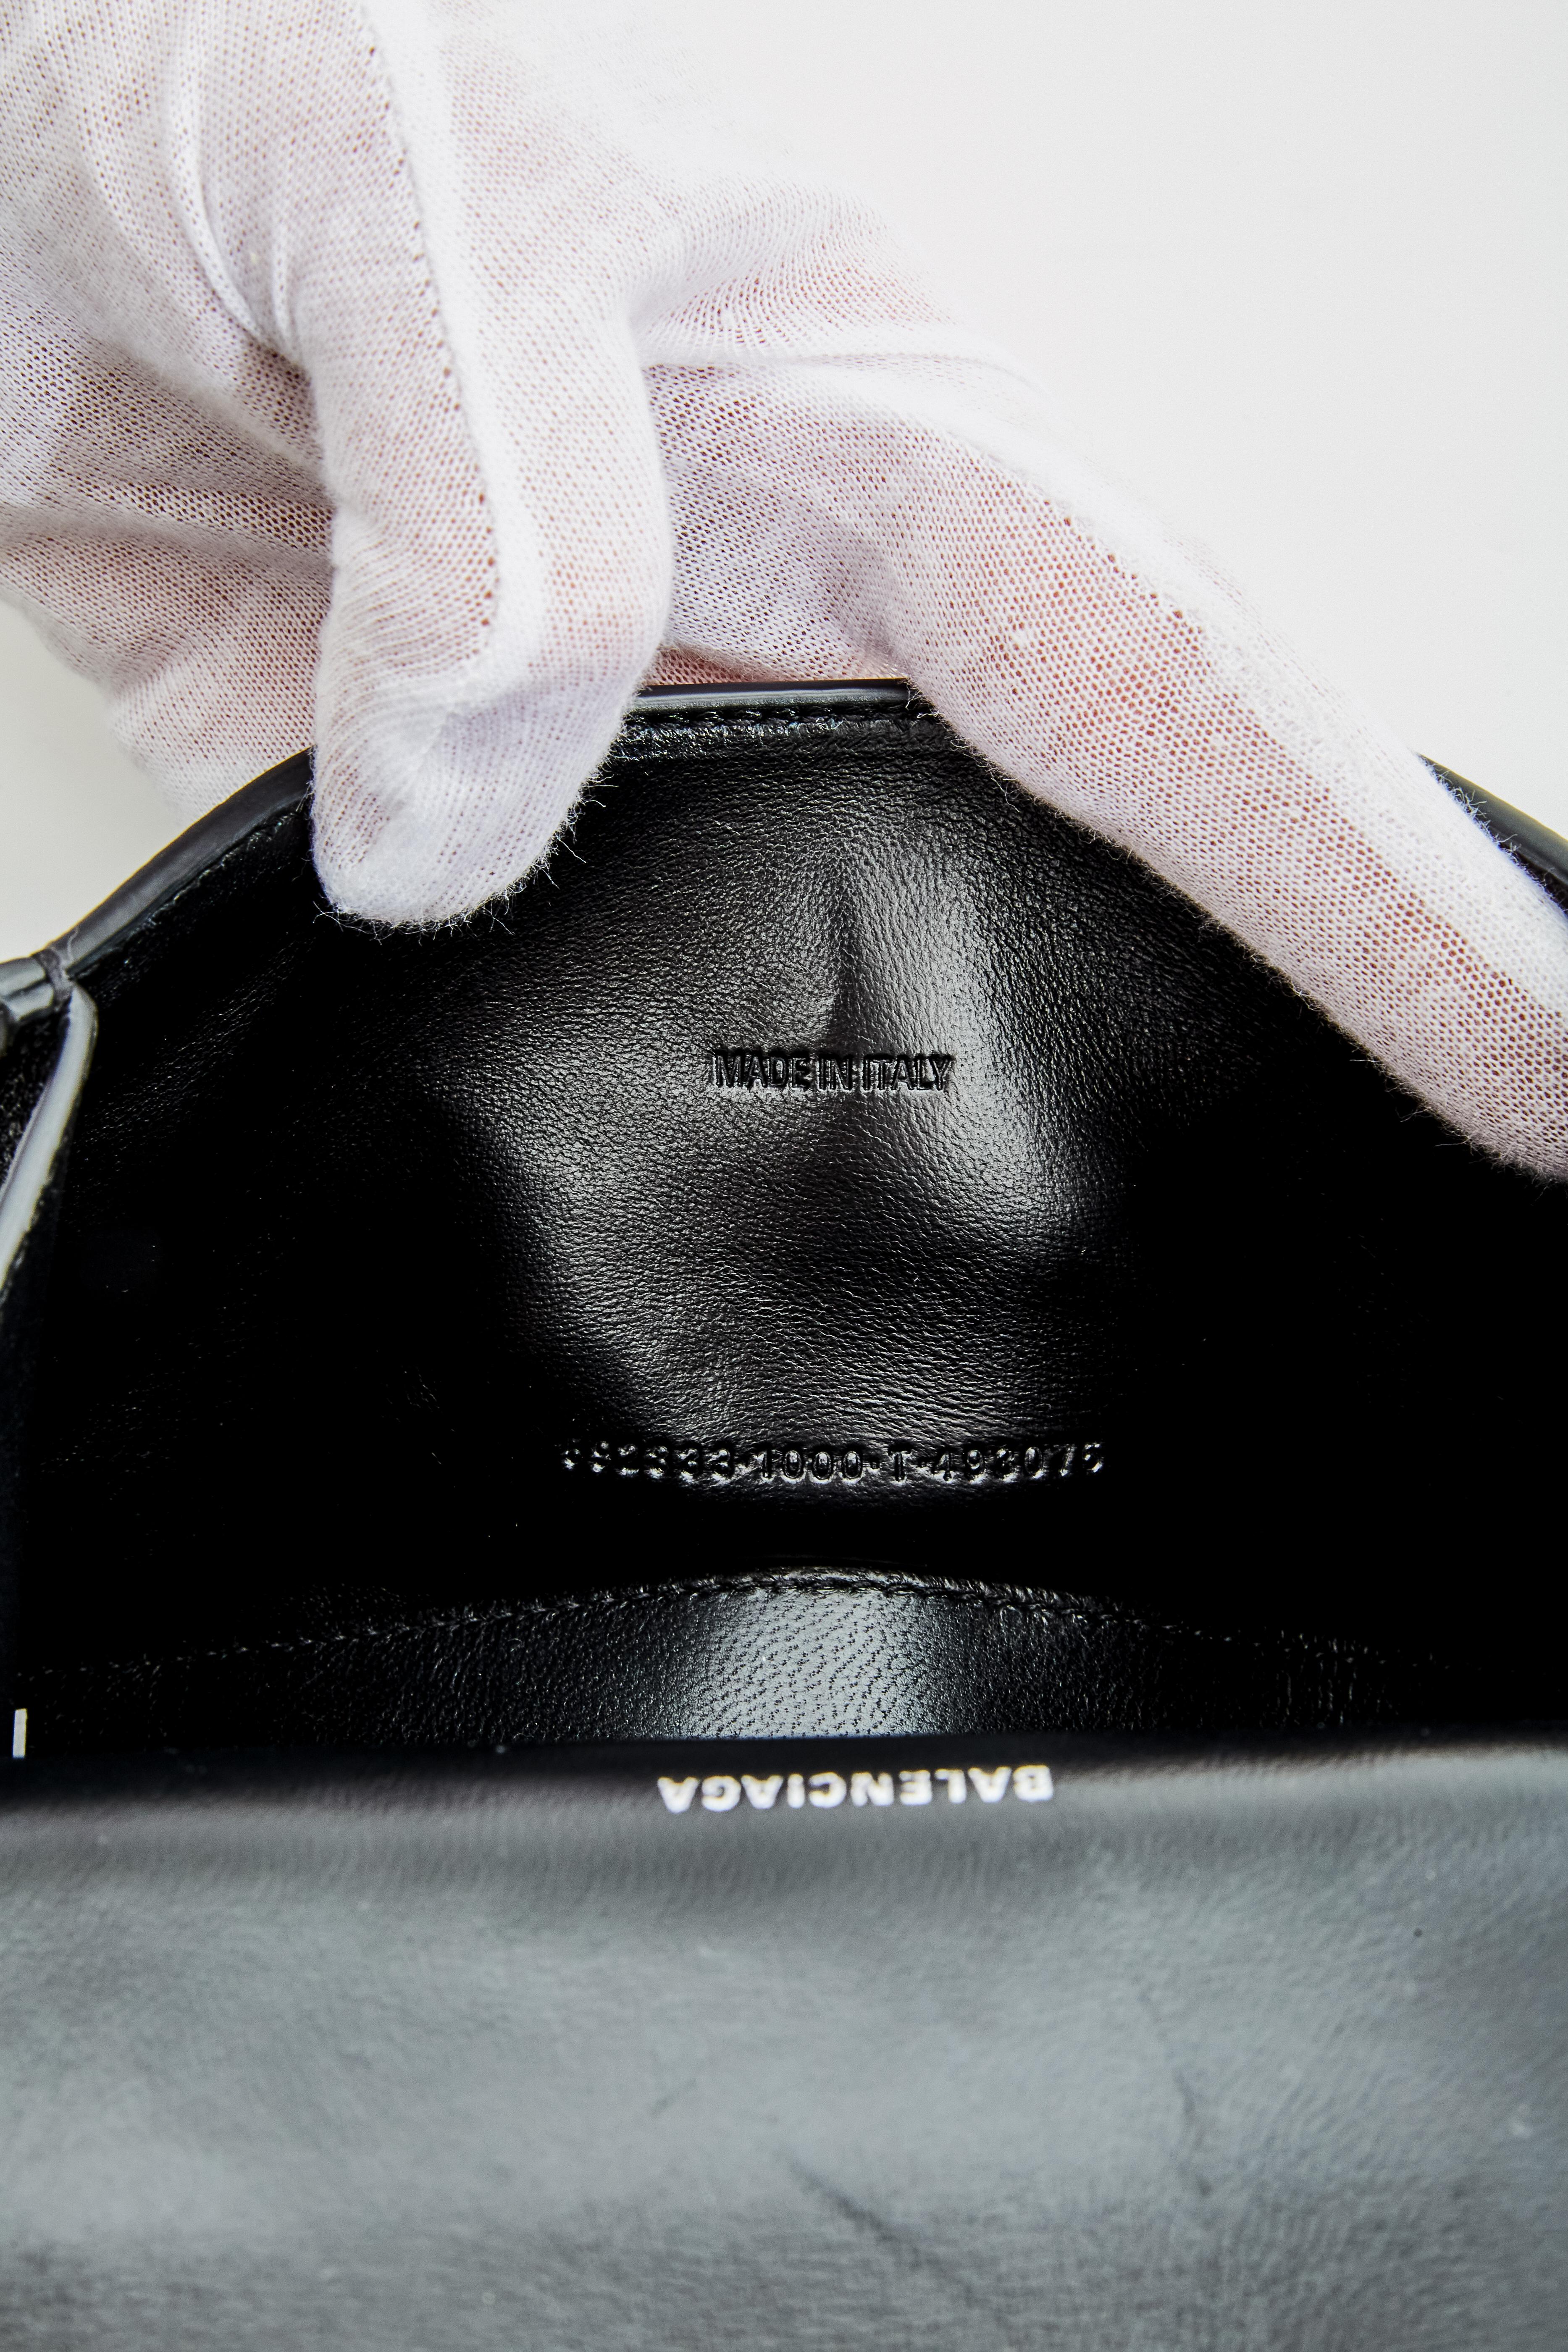 Balenciaga Black Grained Calfskin Leather XS Hourglass Bag In Good Condition For Sale In Montreal, Quebec